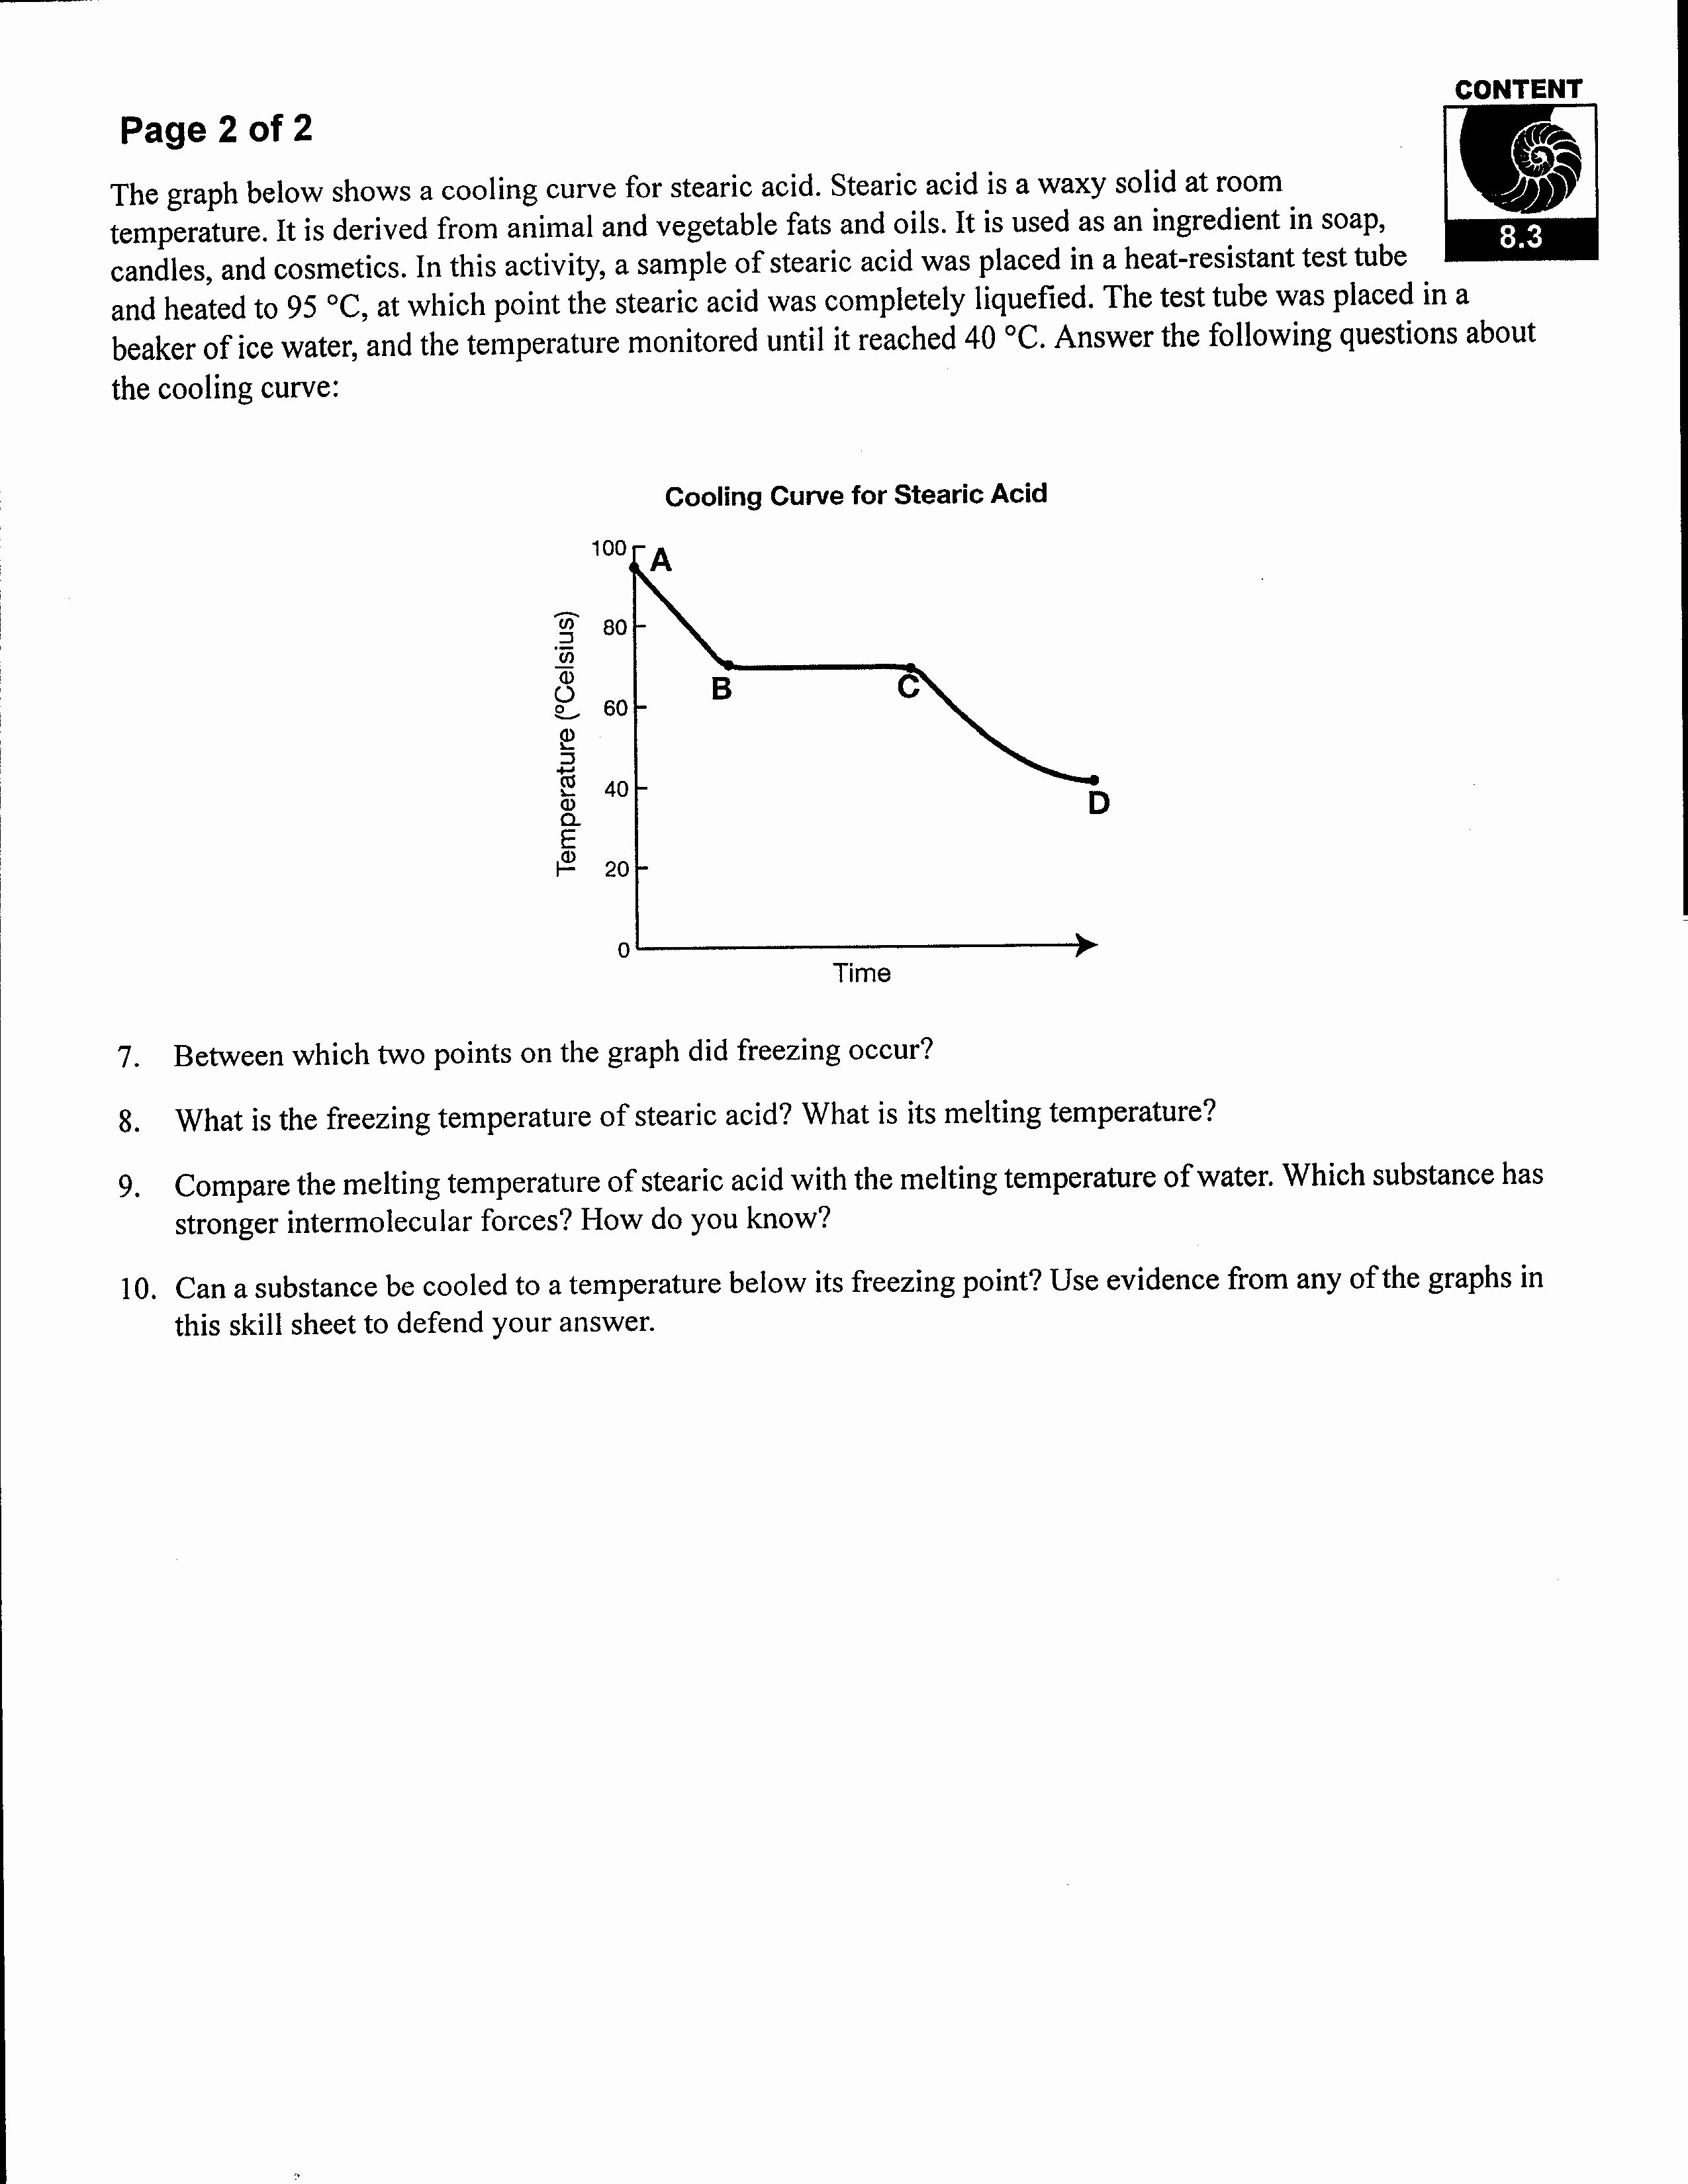 Heating and Cooling Curve Worksheet Elegant assignments Mr foreman S 7th and 8th Grade Classes